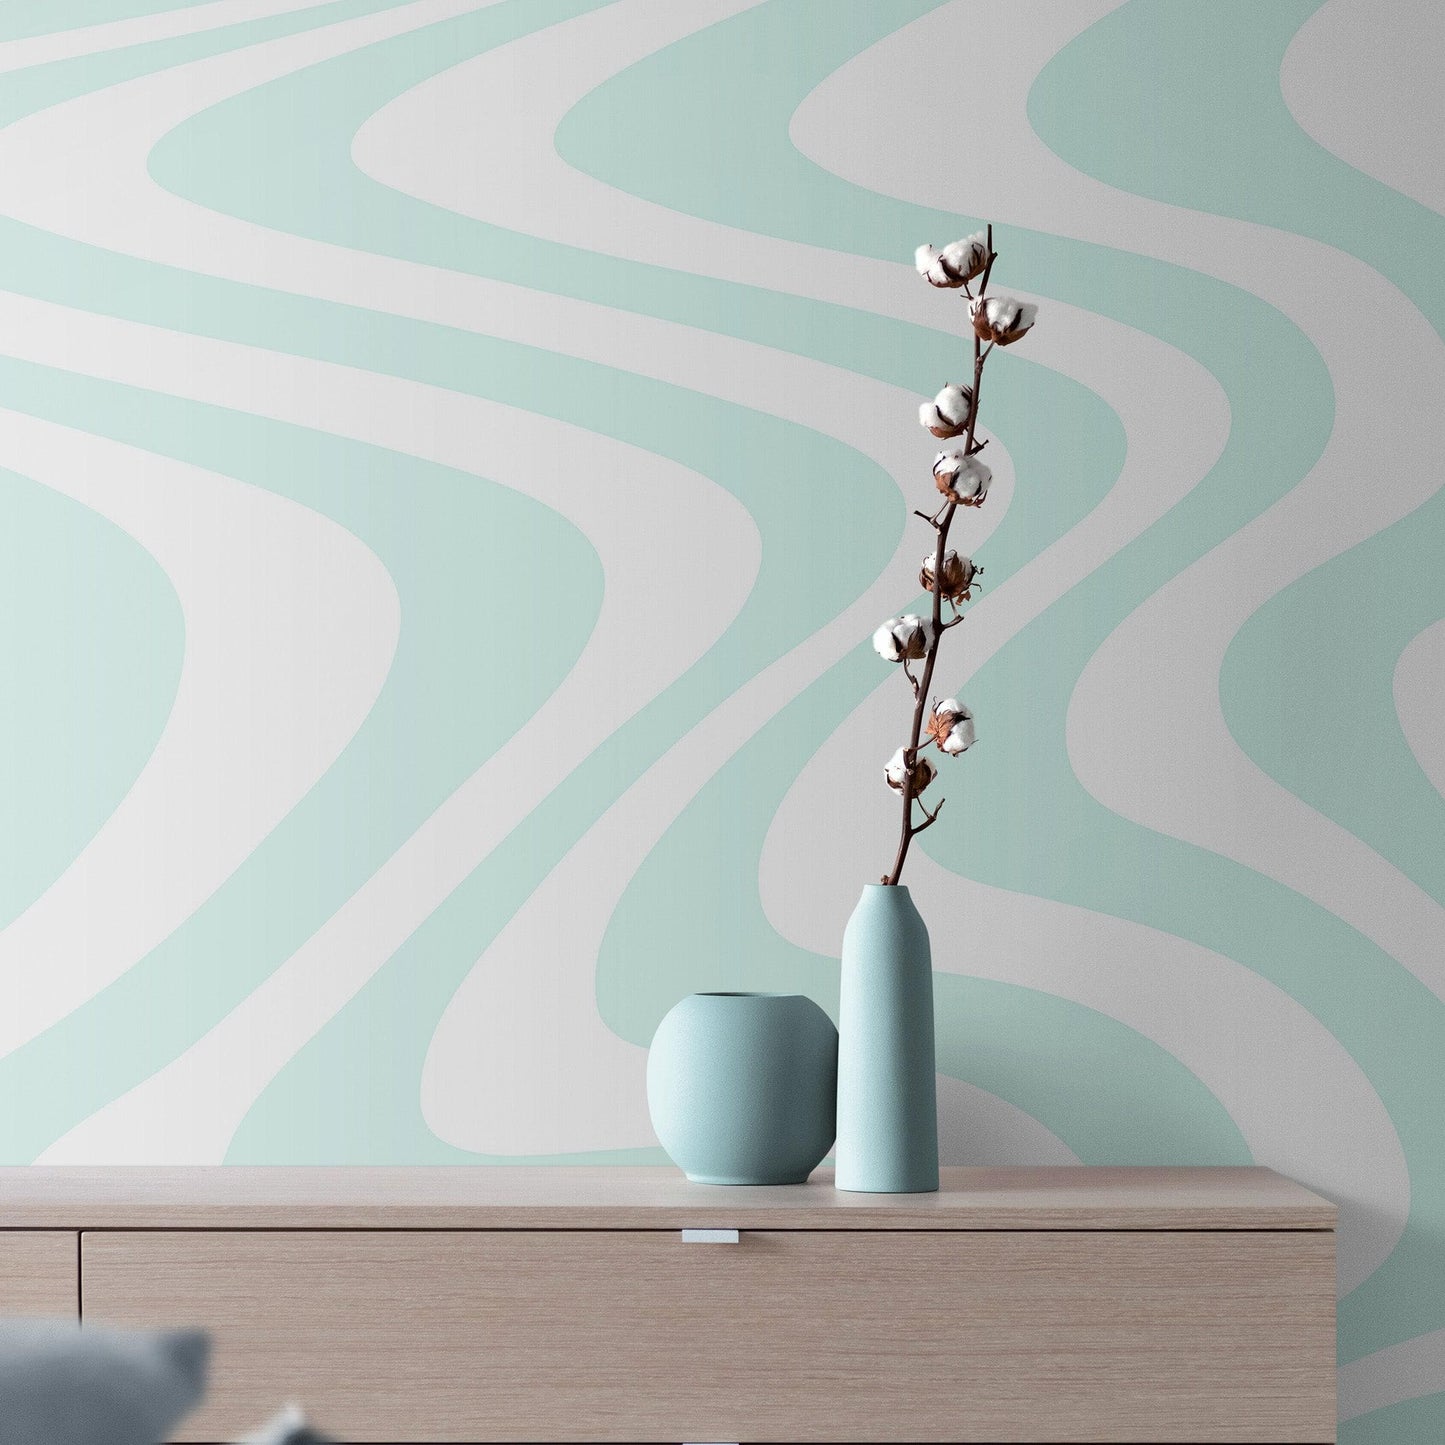 Mint Color Swirly Lines Abstract Wallpaper Mural. #6689